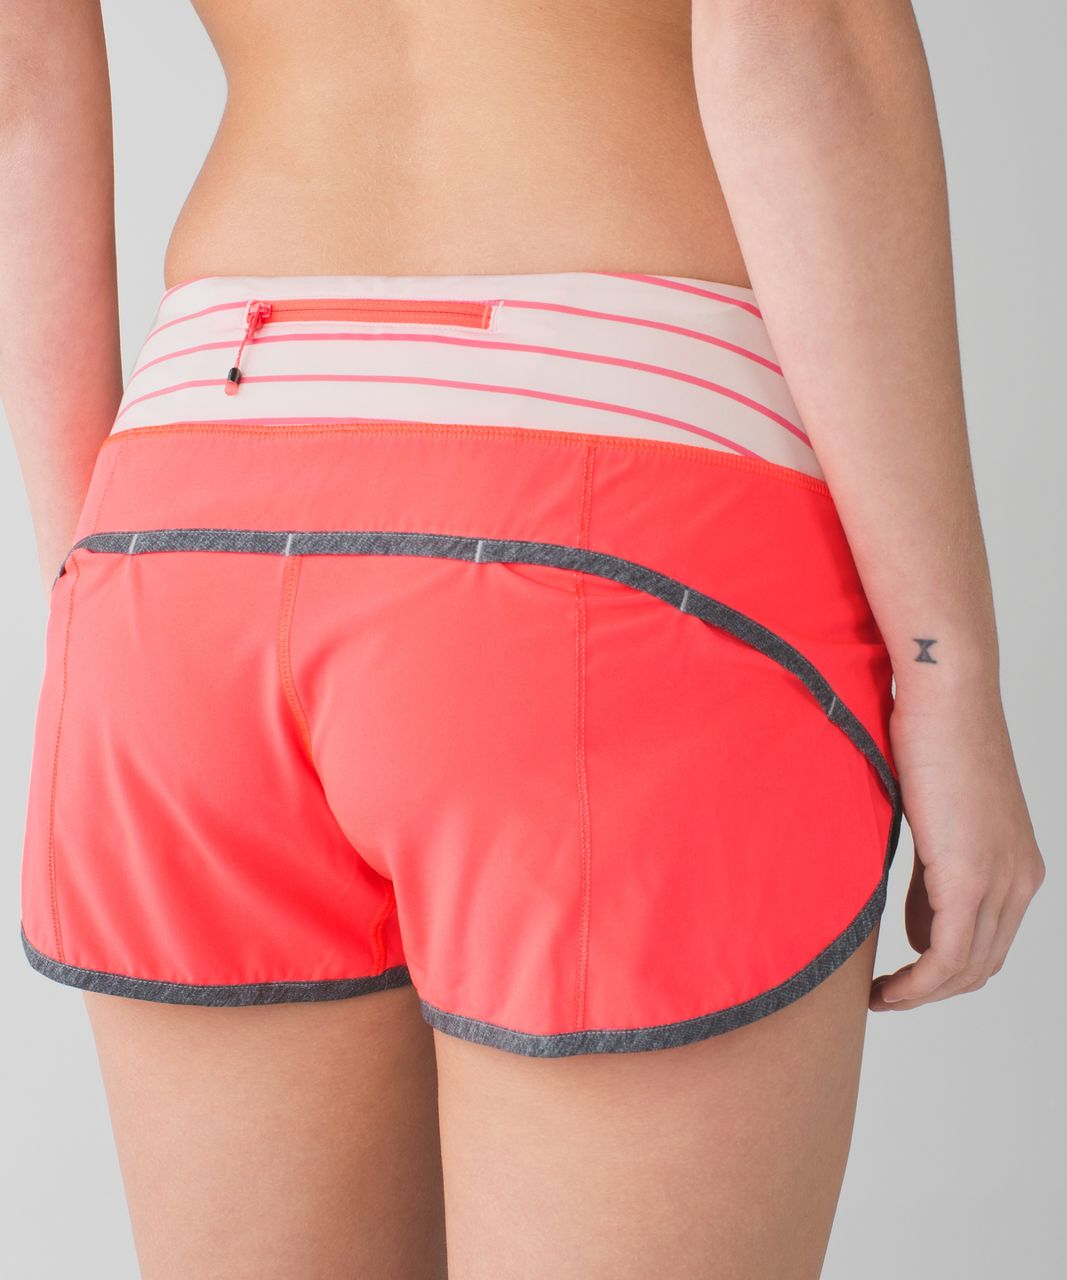 Lululemon Speed Short *4-way Stretch 2.5" - Electric Coral / Quiet Stripe Butter Pink Electric Coral / Heathered Texture Printed Greyt Deep Coal